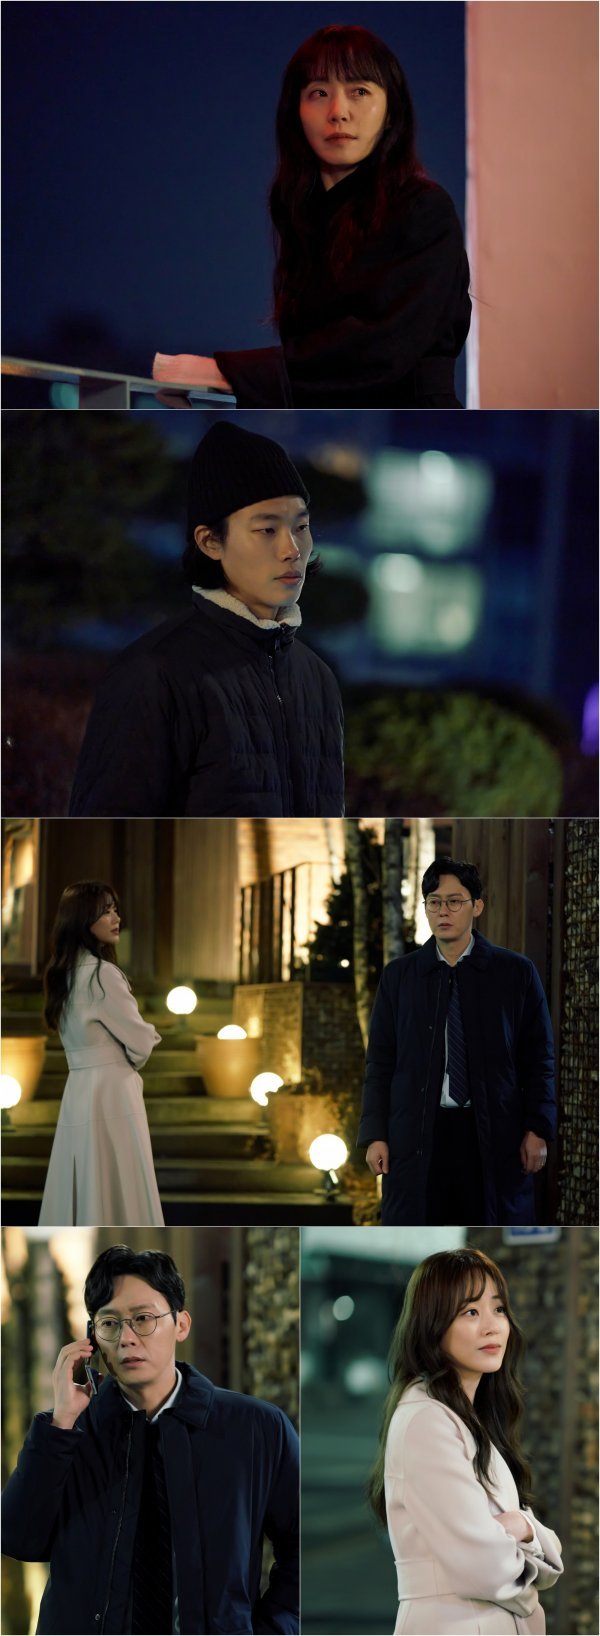 JTBC tenth anniversary SEKYG Entertainment No Longer Human (director Huh Jin-ho, Park Hong-soo, and playwright Kim Ji-hye) captured The Slap of four men and women who were shaking dangerously on the 5th, ahead of the broadcast twice.The accidental meeting between Jeon Do-yeon and Ryu Jun-yeol, and the long-standing relationship between the inseparable integer (Park Byung-eun) and Kyung-eun (Kim Hyo-jin) raise questions about what changes will be made.No Longer Human has been a true figure since its first broadcast with different emotions.The delicate production that further raised the temperature of emotion, the in-depth script that shows insight into life, and the God synergy created by the actors hot performances here showed the essence of human melody.The two men who were lost in the downhill and uphill middle of life, the injustice and the steel, which had no different goals and directions of life, met like fate.The two men and women facing each other in front of the intense darkness gather expectations about what story they will draw.In the meantime, the second meeting of injustice and steel in the public photos focuses attention, and the atmosphere of heavy sinking between the two people who found each other in Rooftop in the middle of the night is unusual.The tears flowing over the cheeks of the negativity that look at the steel add to the question of what the story will be. Another photo also contains the awkward The Slap of Jungsu and Kyung Eun.The expression of the essence of trying to ignore the first love that has not been separated for 15 years is cold. The relaxed smile of Gyeong-eun, who watches the essence of the phone conversation with his wifes denial, is also interesting.It is noteworthy how these Slaps will make a difference.In the second episode, which airs today (5th), the denial bursts into uncontrollable anger and One network toward Aran (Park Ji-young).It is also depicted as a steel material that faces the things that the injustice wants to hide, whether it is a coincidence or inevitable.In the repetition of the accident, denial and steel will be gradually closer to unknown attraction and curiosity, said the production team of No Longer Human. Please focus on the changes in the relationship between the characters who are beginning to get entangled, including Jeongsu and Gyeongeun.JTBC tenth anniversary SEKYG Entertainment No Longer Human will be broadcast today (5th) at 10:30 pm.Photos - CJS Entertainment and Drama House Studio